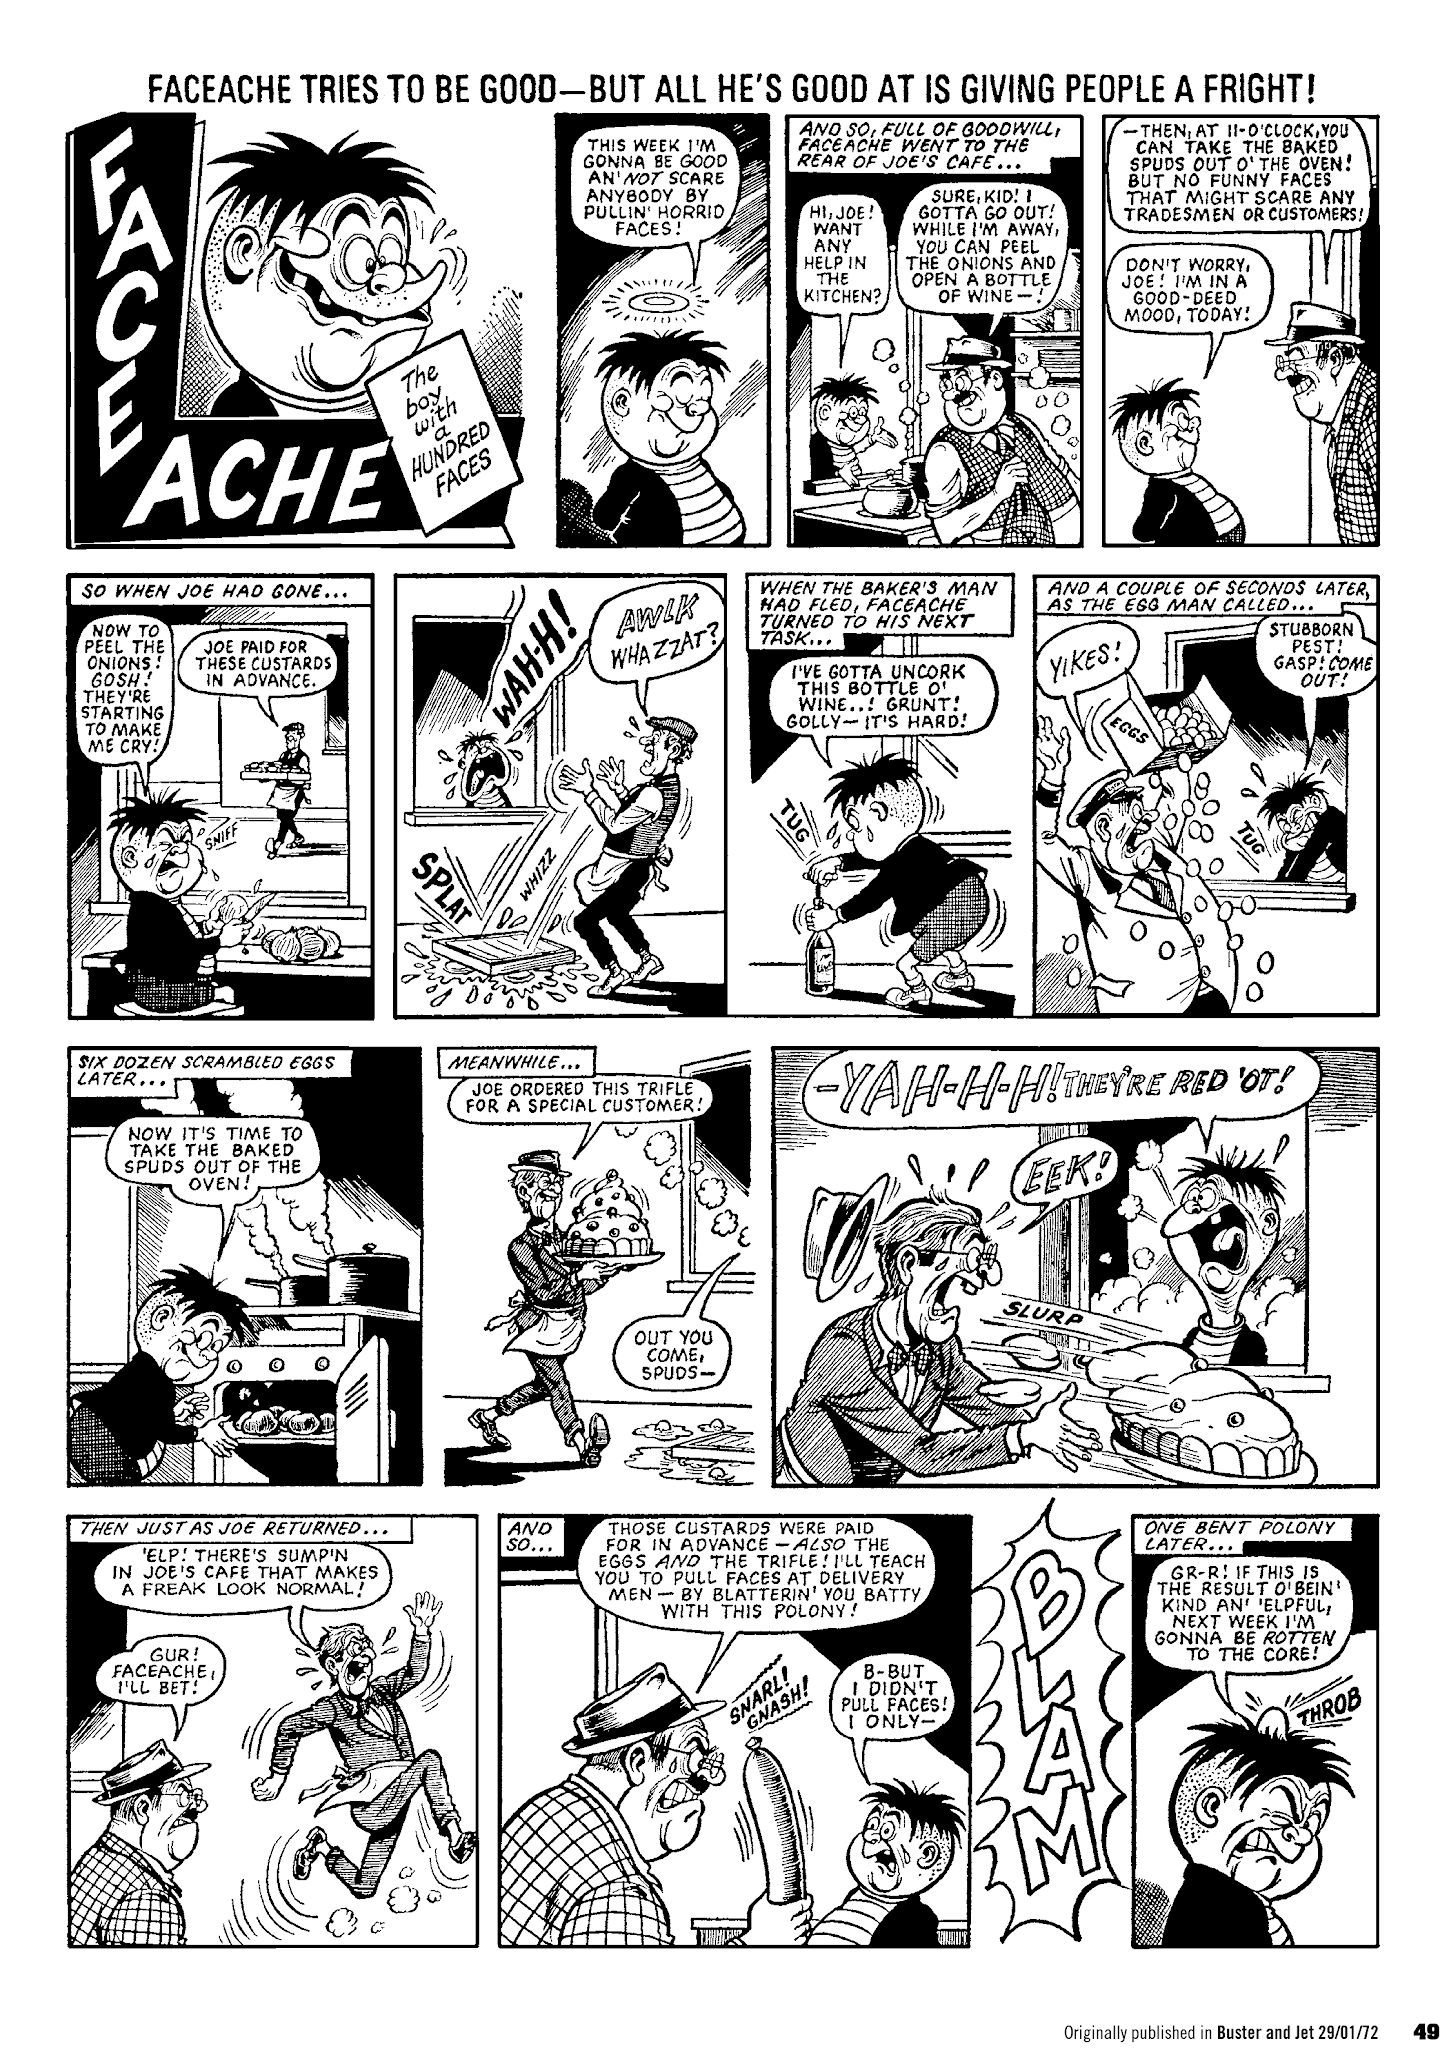 Read online Faceache: The First Hundred Scrunges comic -  Issue # TPB 1 - 51